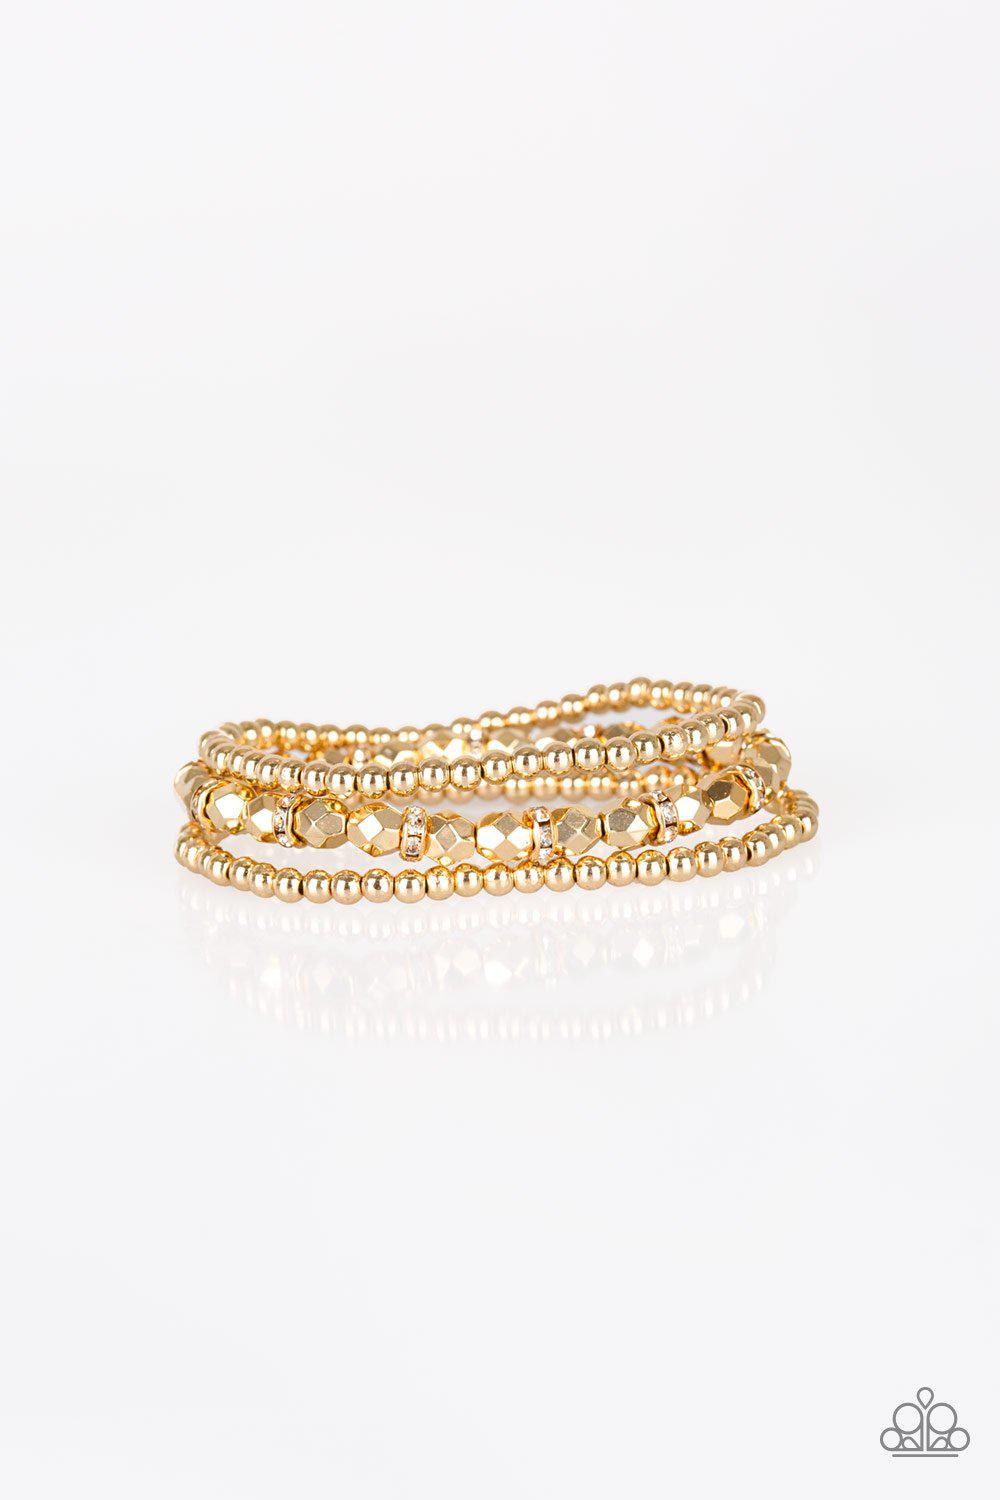 Let There BEAM Light Gold Stretch Bracelet Set - Paparazzi Accessories-CarasShop.com - $5 Jewelry by Cara Jewels